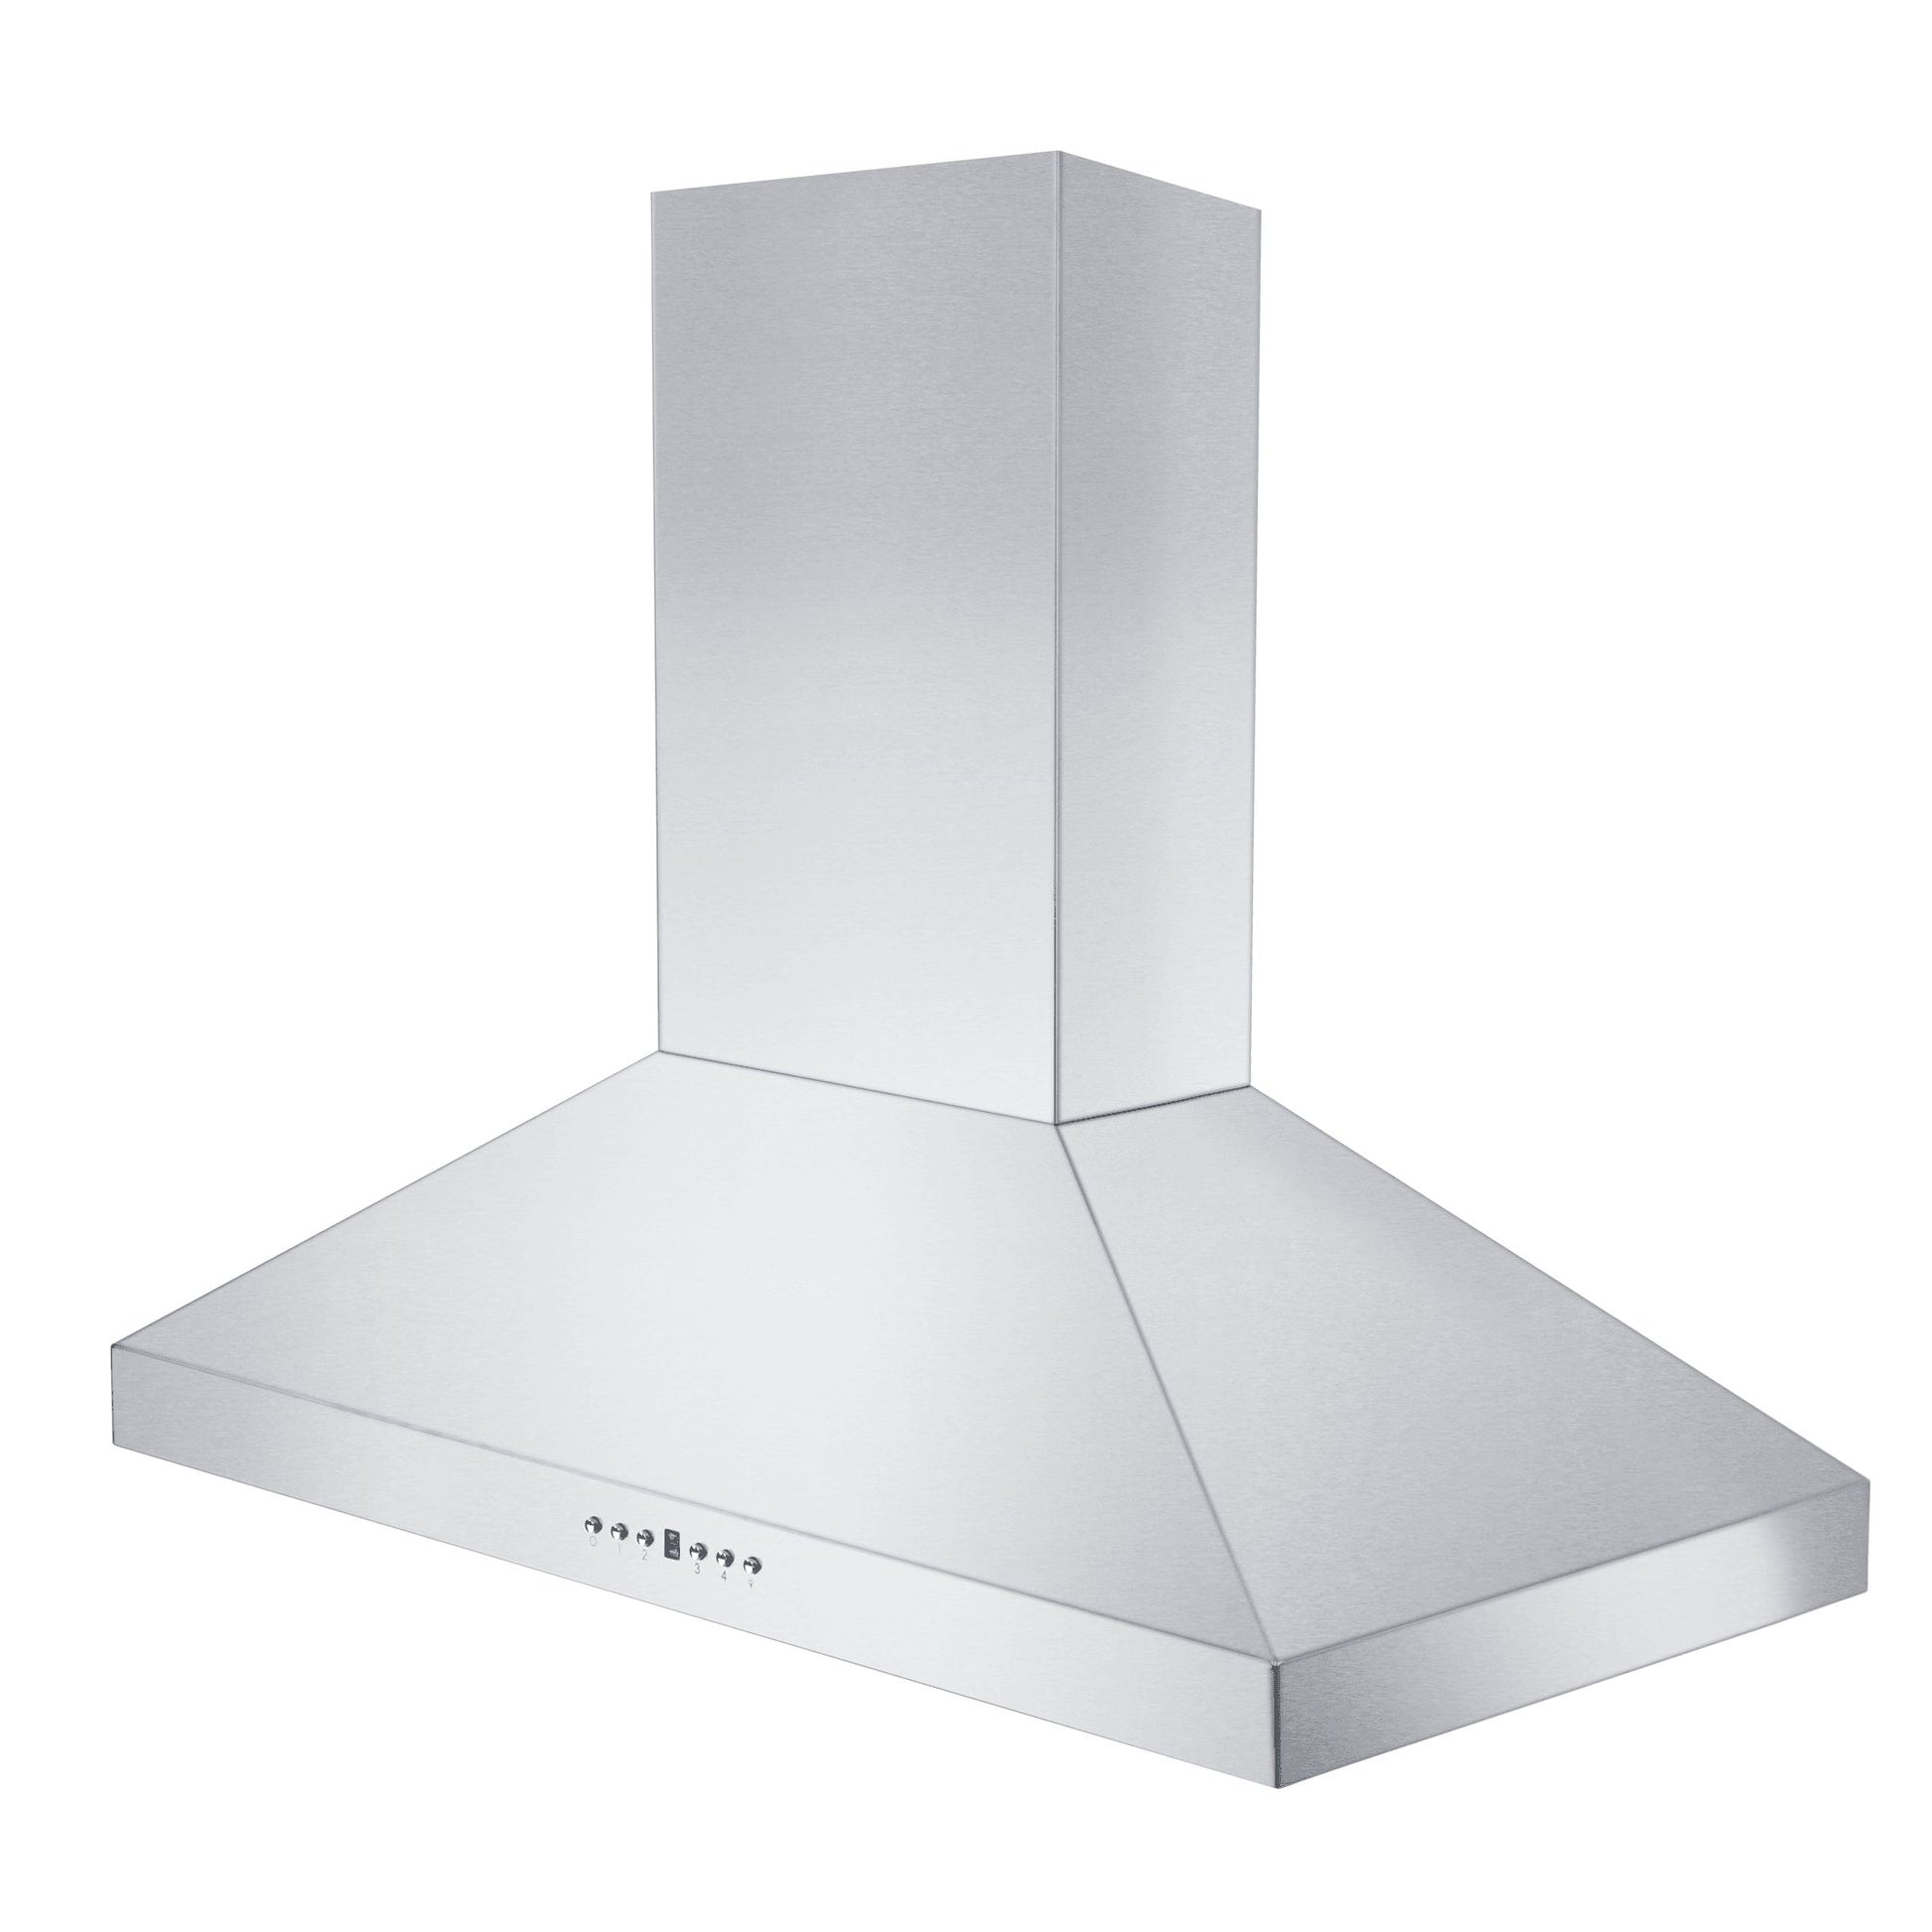 ZLINE Convertible Vent Wall Mount Range Hood in Stainless Steel (KL3) side above.